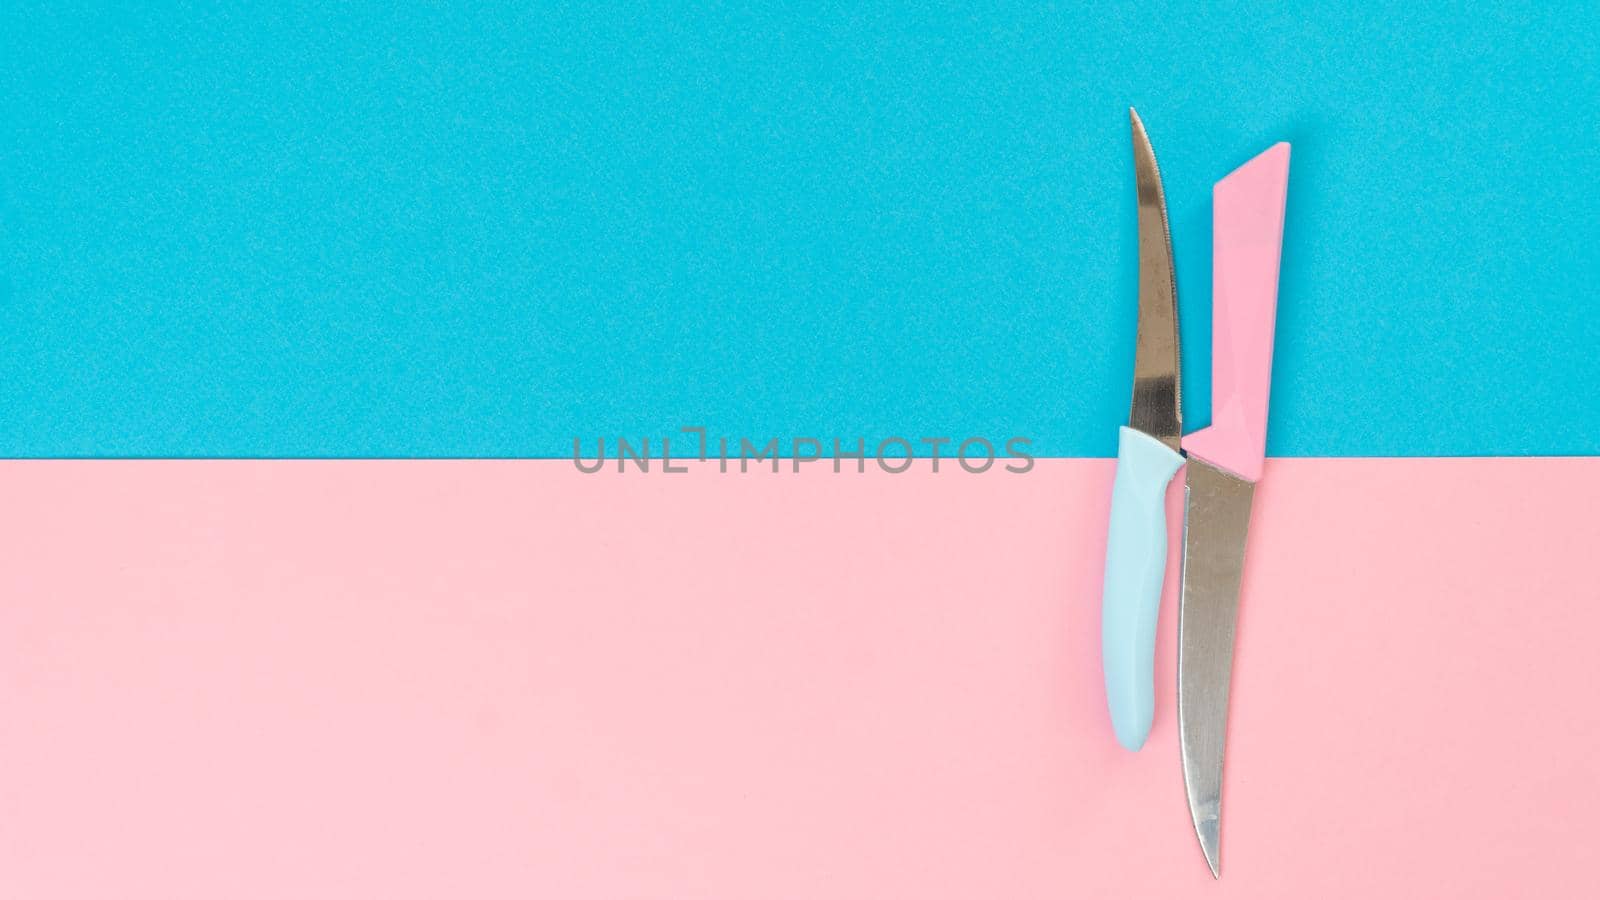 Composition of two colors - knives on a two-tone background. High quality photo